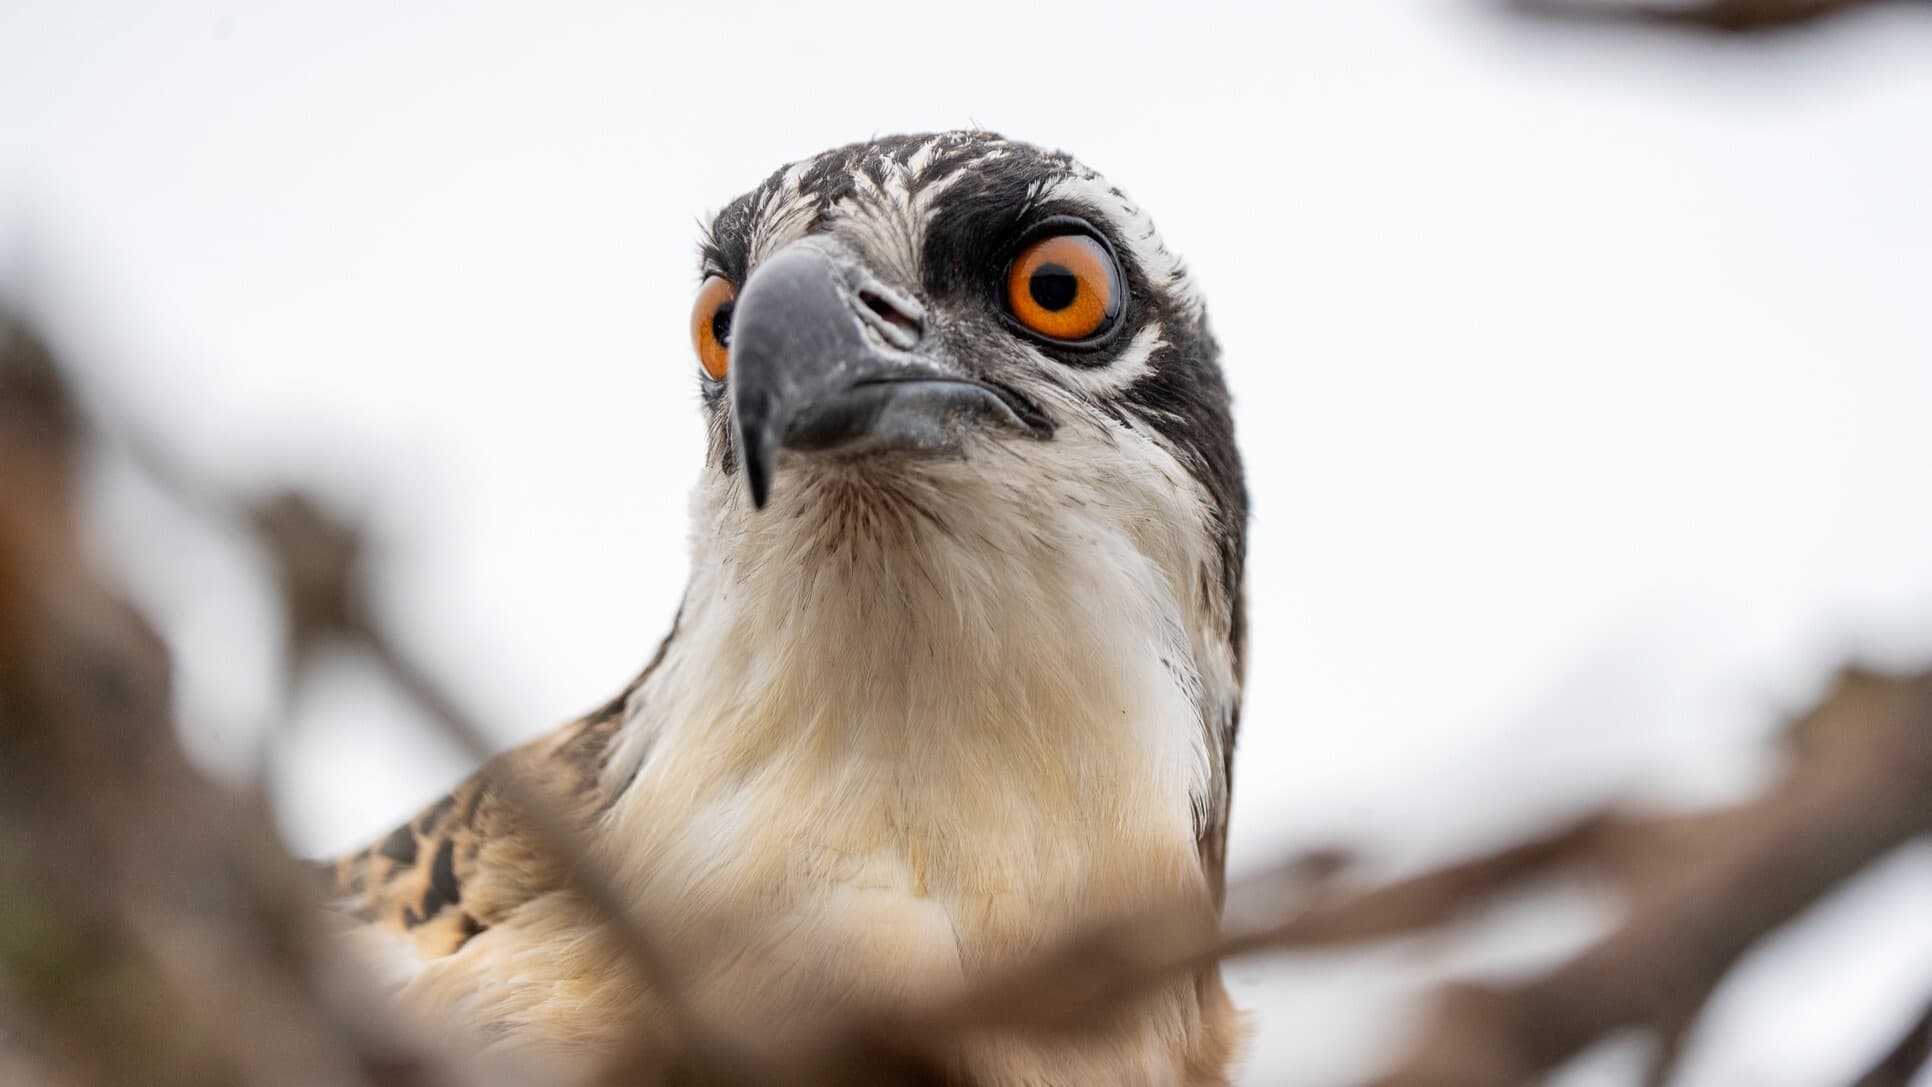 A close up of an osprey as it rests and watches its surroundings from its nest